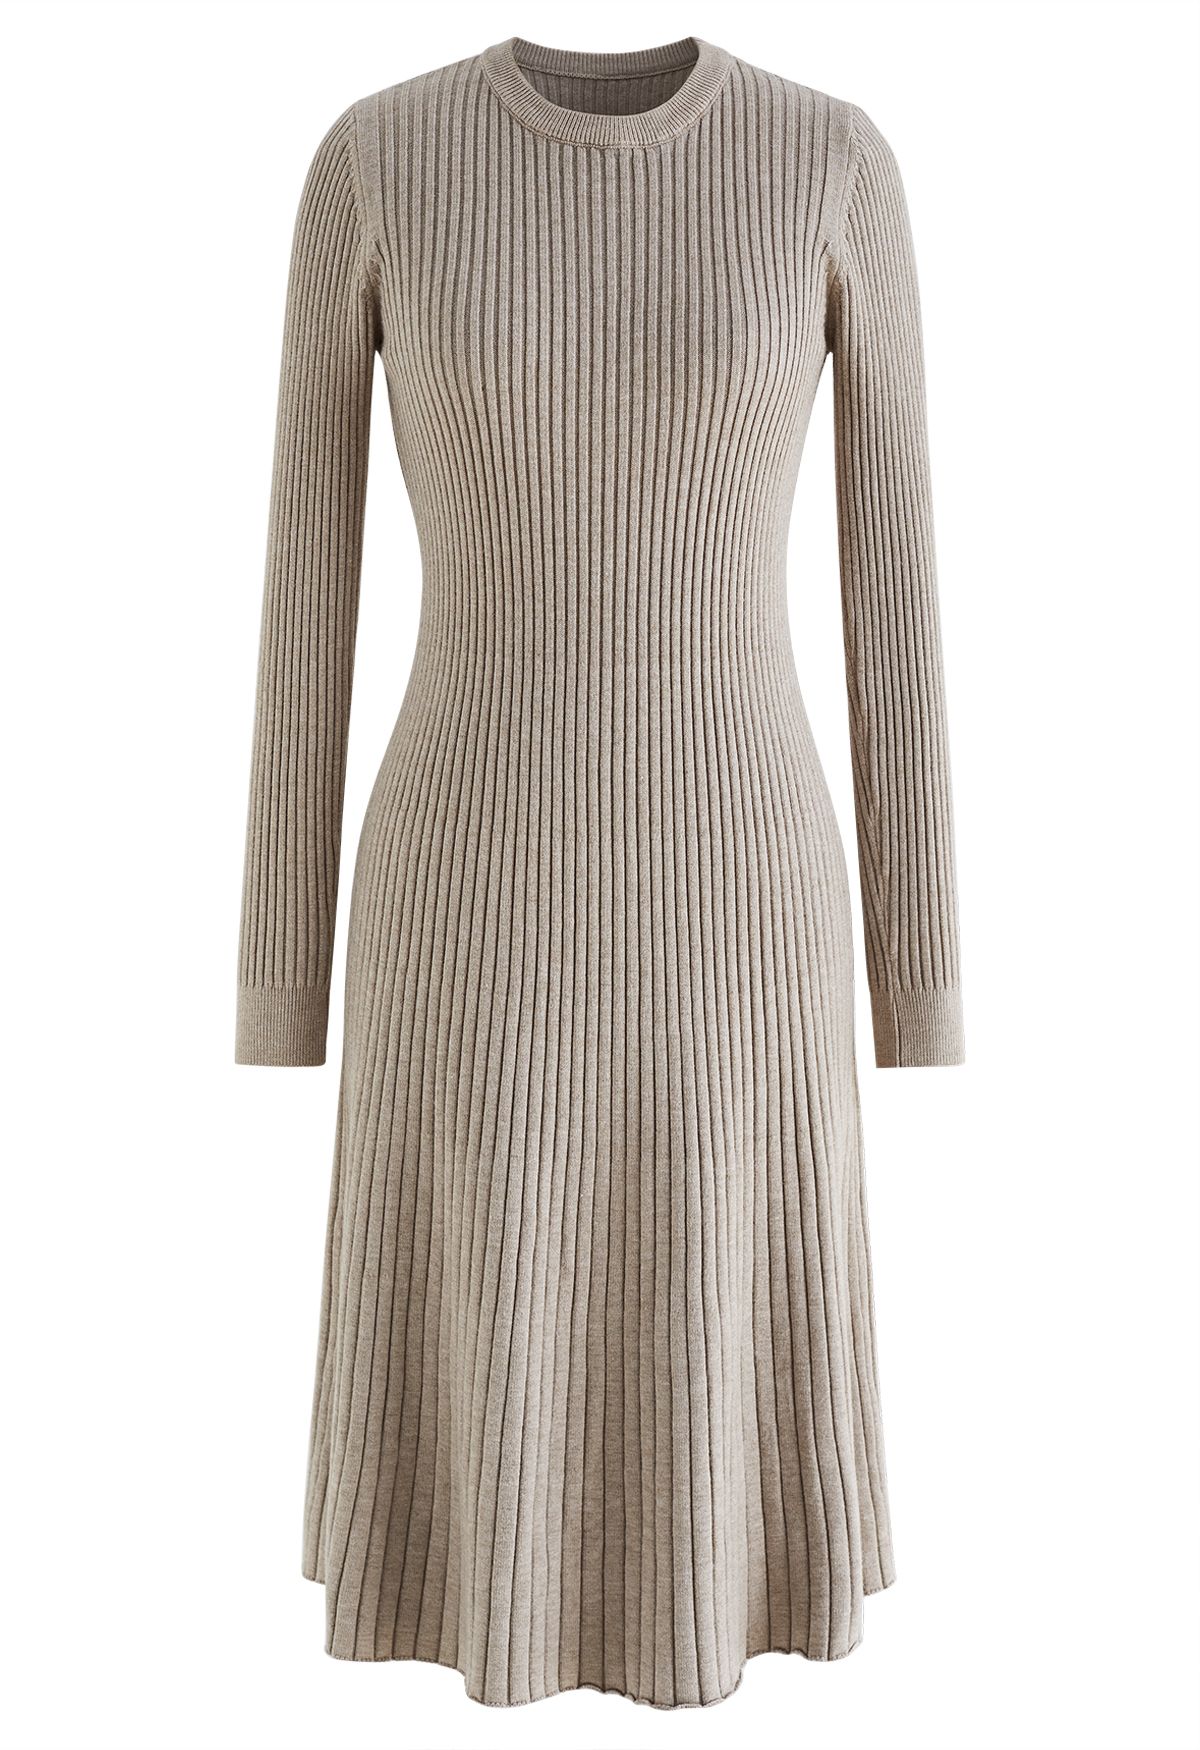 Ribbed Texture Frilling Midi Dress in Taupe - Retro, Indie and Unique ...